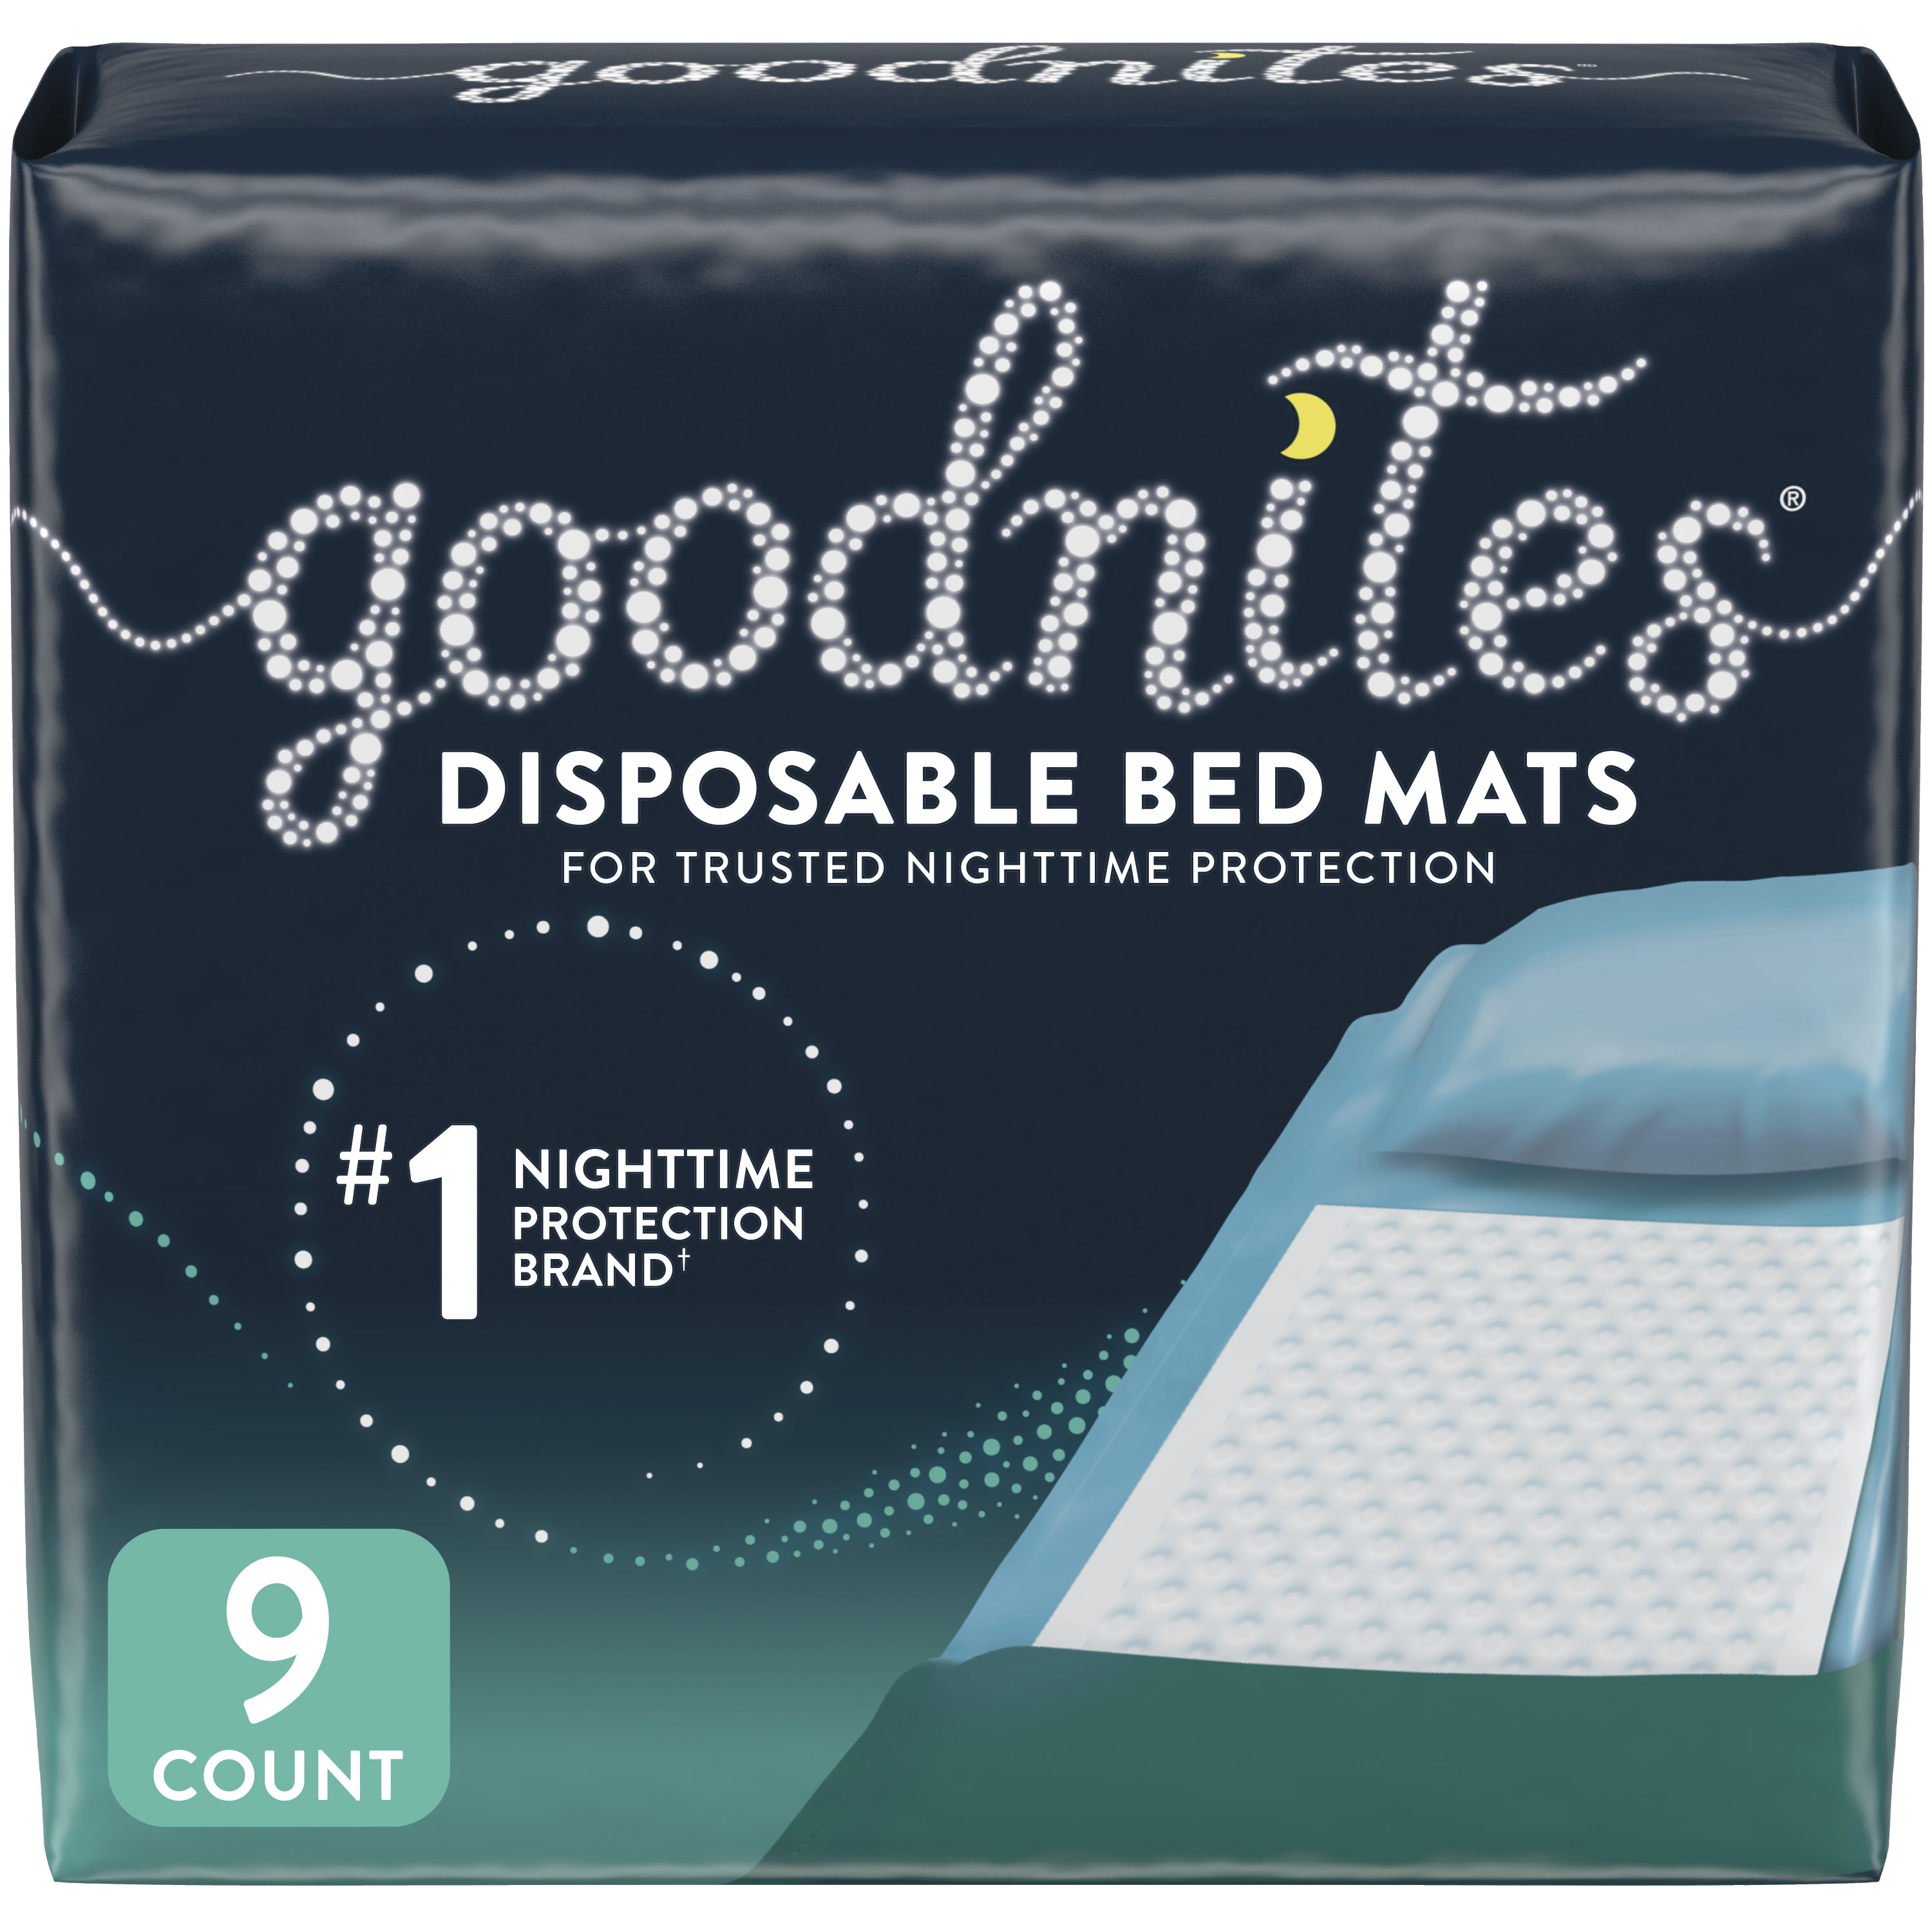 Goodnites Disposable Bed Pads for Bedwetting, 9 Ct (Select for More Options) - image 1 of 8